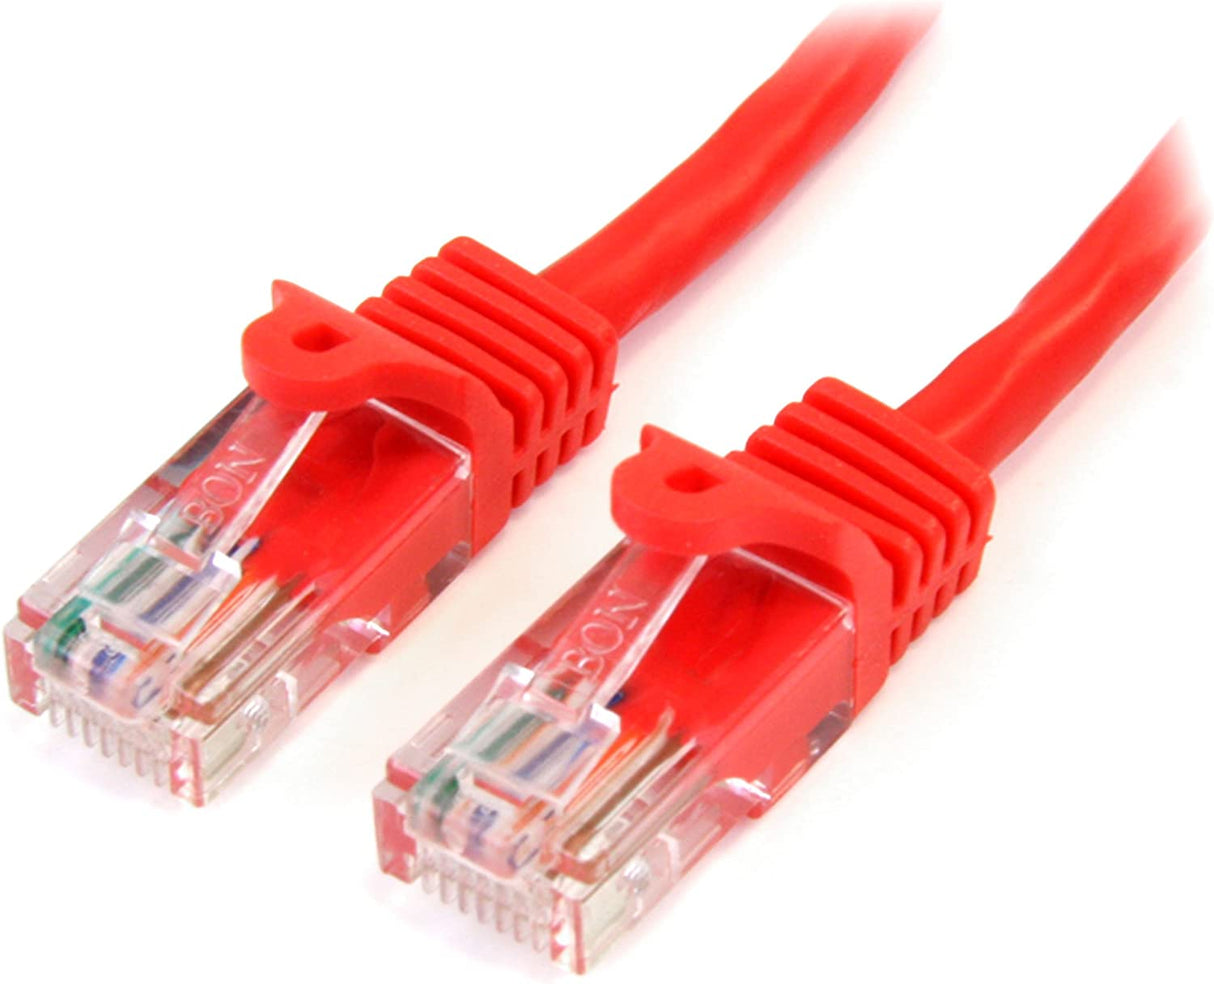 StarTech.com Cat5e Ethernet Cable - 3 ft - Red- Patch Cable - Snagless Cat5e Cable - Short Network Cable - Ethernet Cord - Cat 5e Cable - 3ft (45PATCH3RD) 3 ft / 1m Red